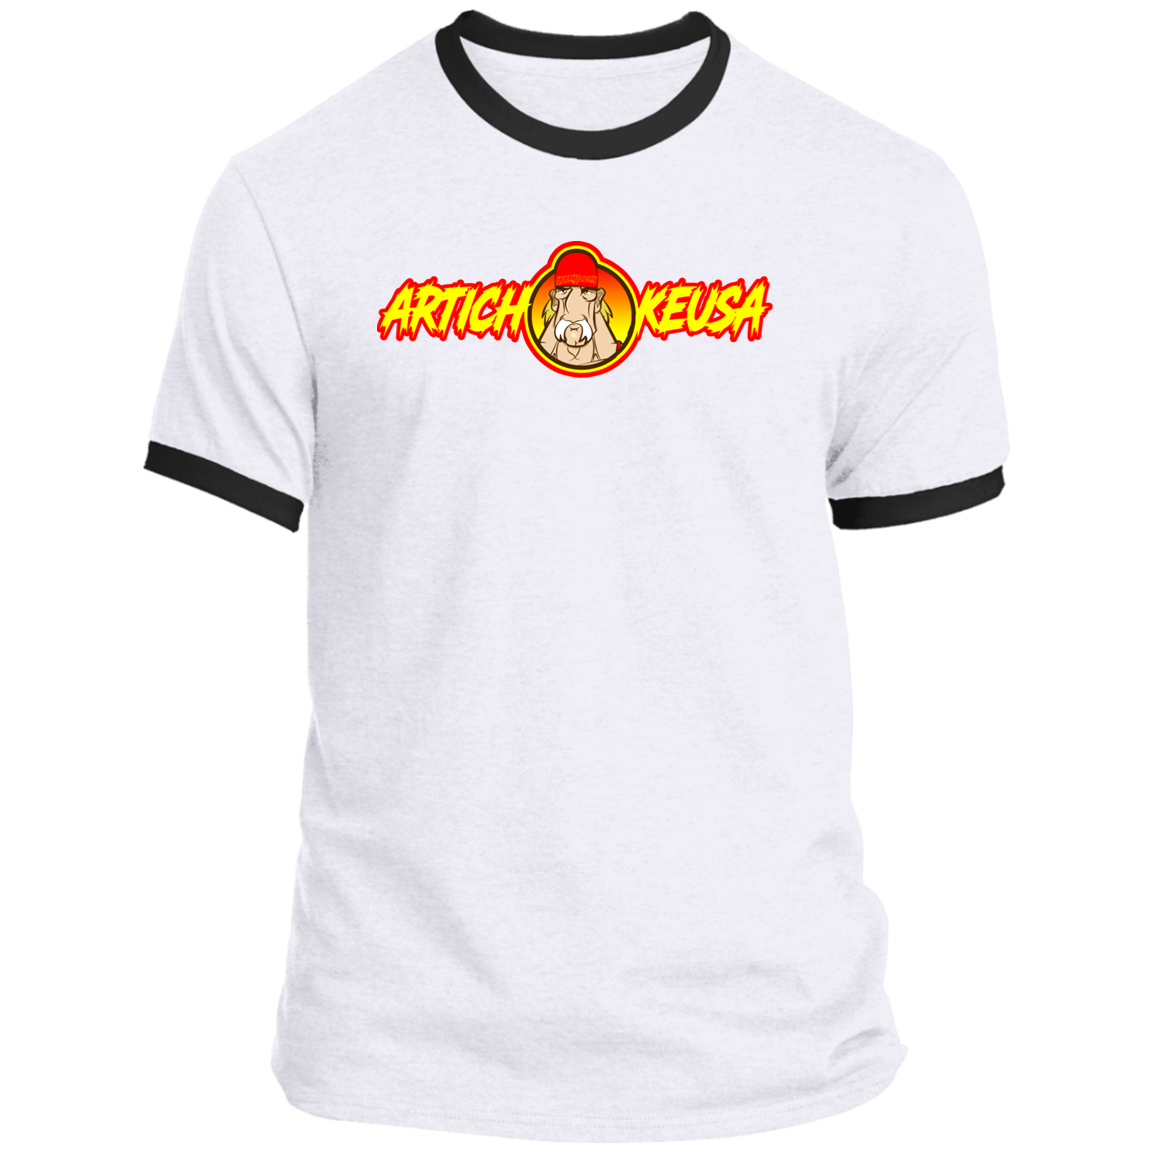 ArtichokeUSA Character and Font Design. Let’s Create Your Own Design Today. Fan Art. The Hulkster. Ringer Tee